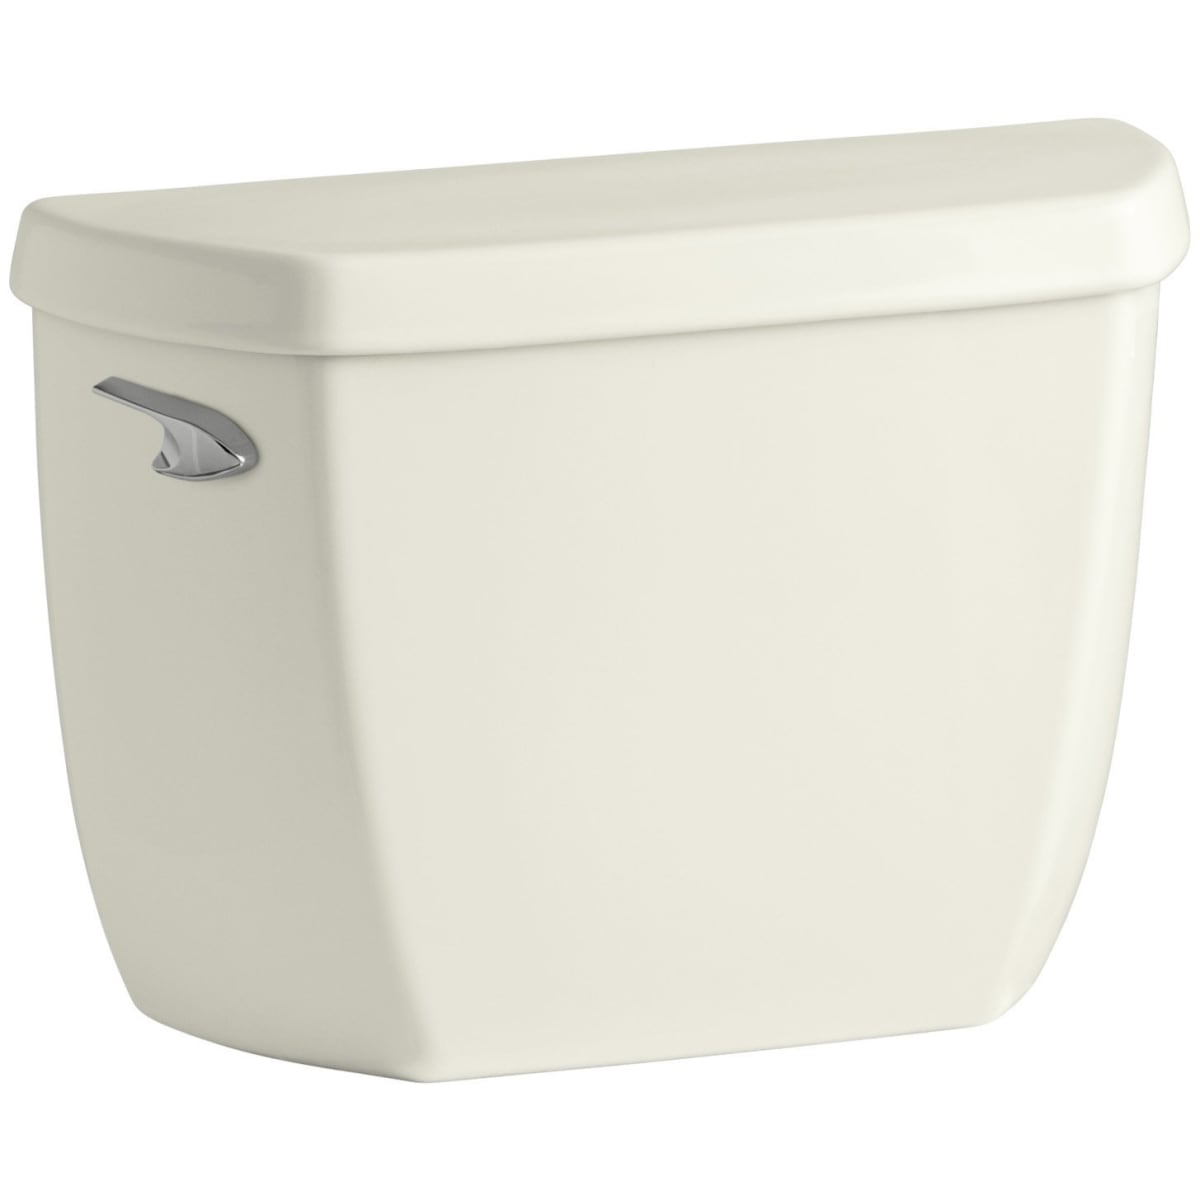 Kohler K-4436-0 White 1.28 Gpf Toilet Tank with Class Five Flushing  Technology from the Wellworth Series